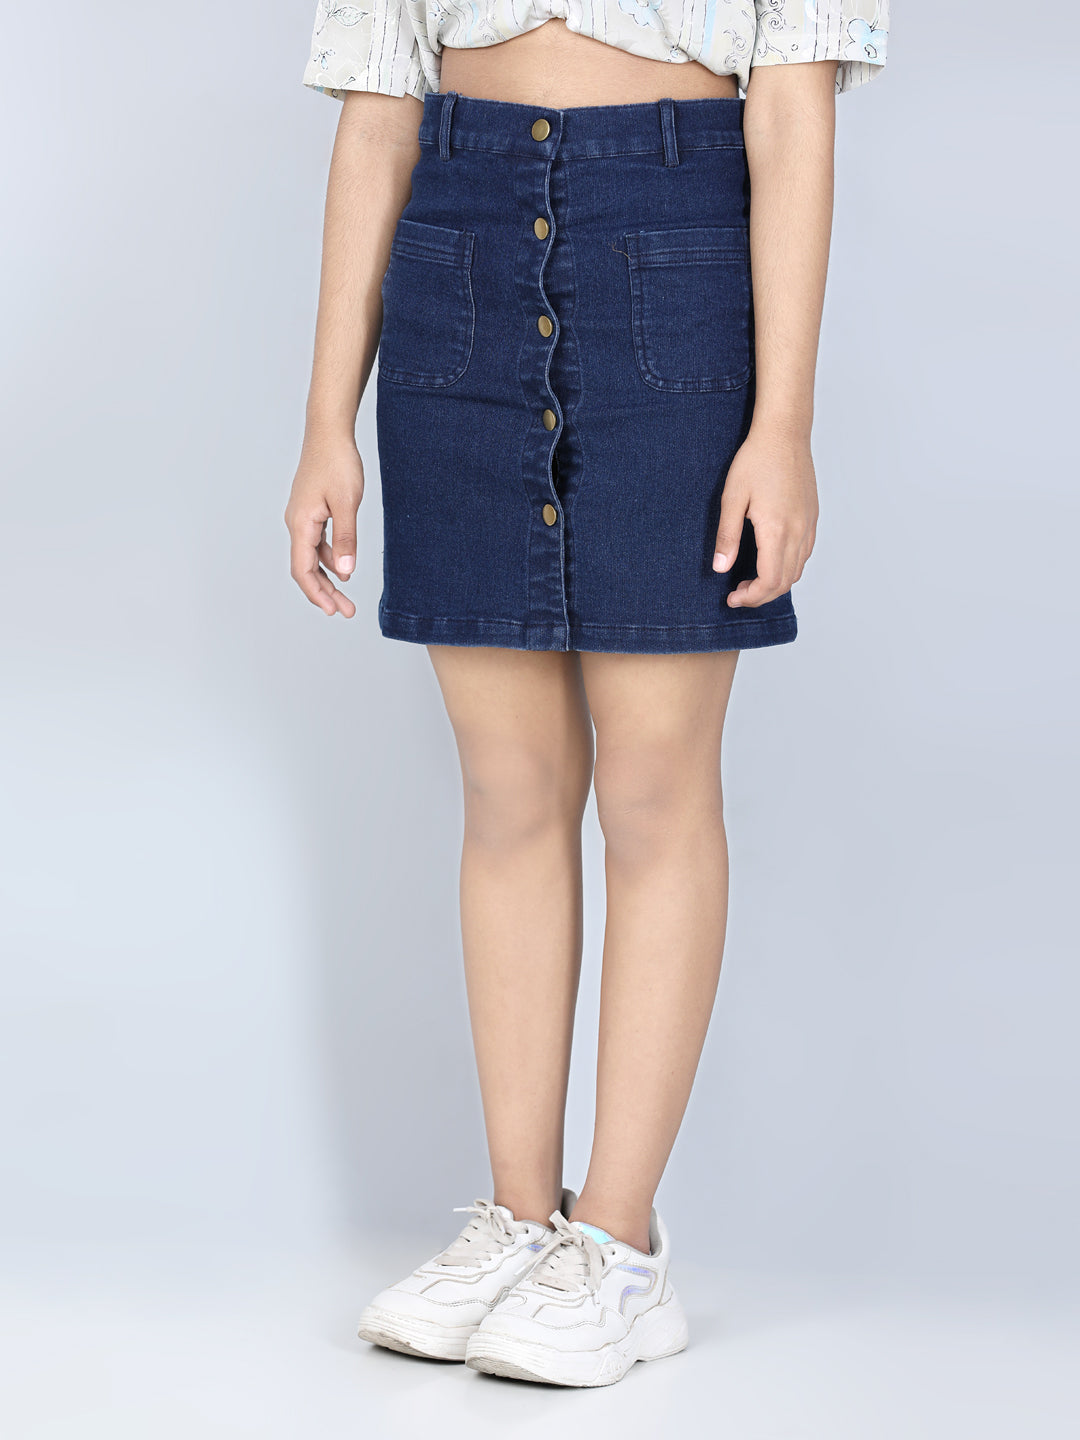 Girls Denim Skirt with front Buttons